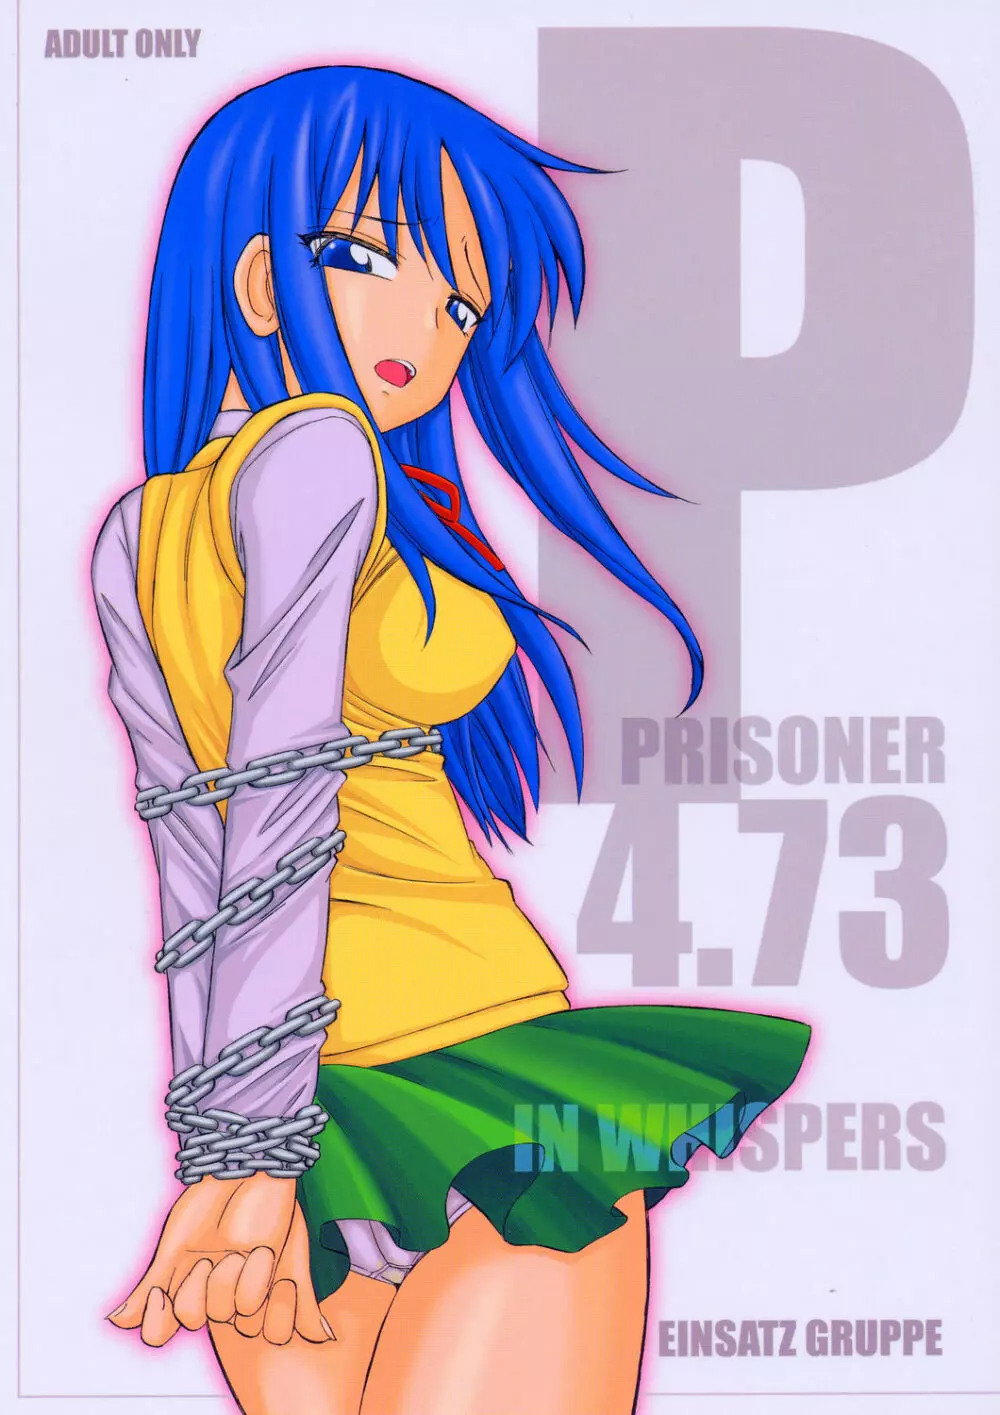 P4.73 PRISONER 4.73 IN WHISPERS - page1